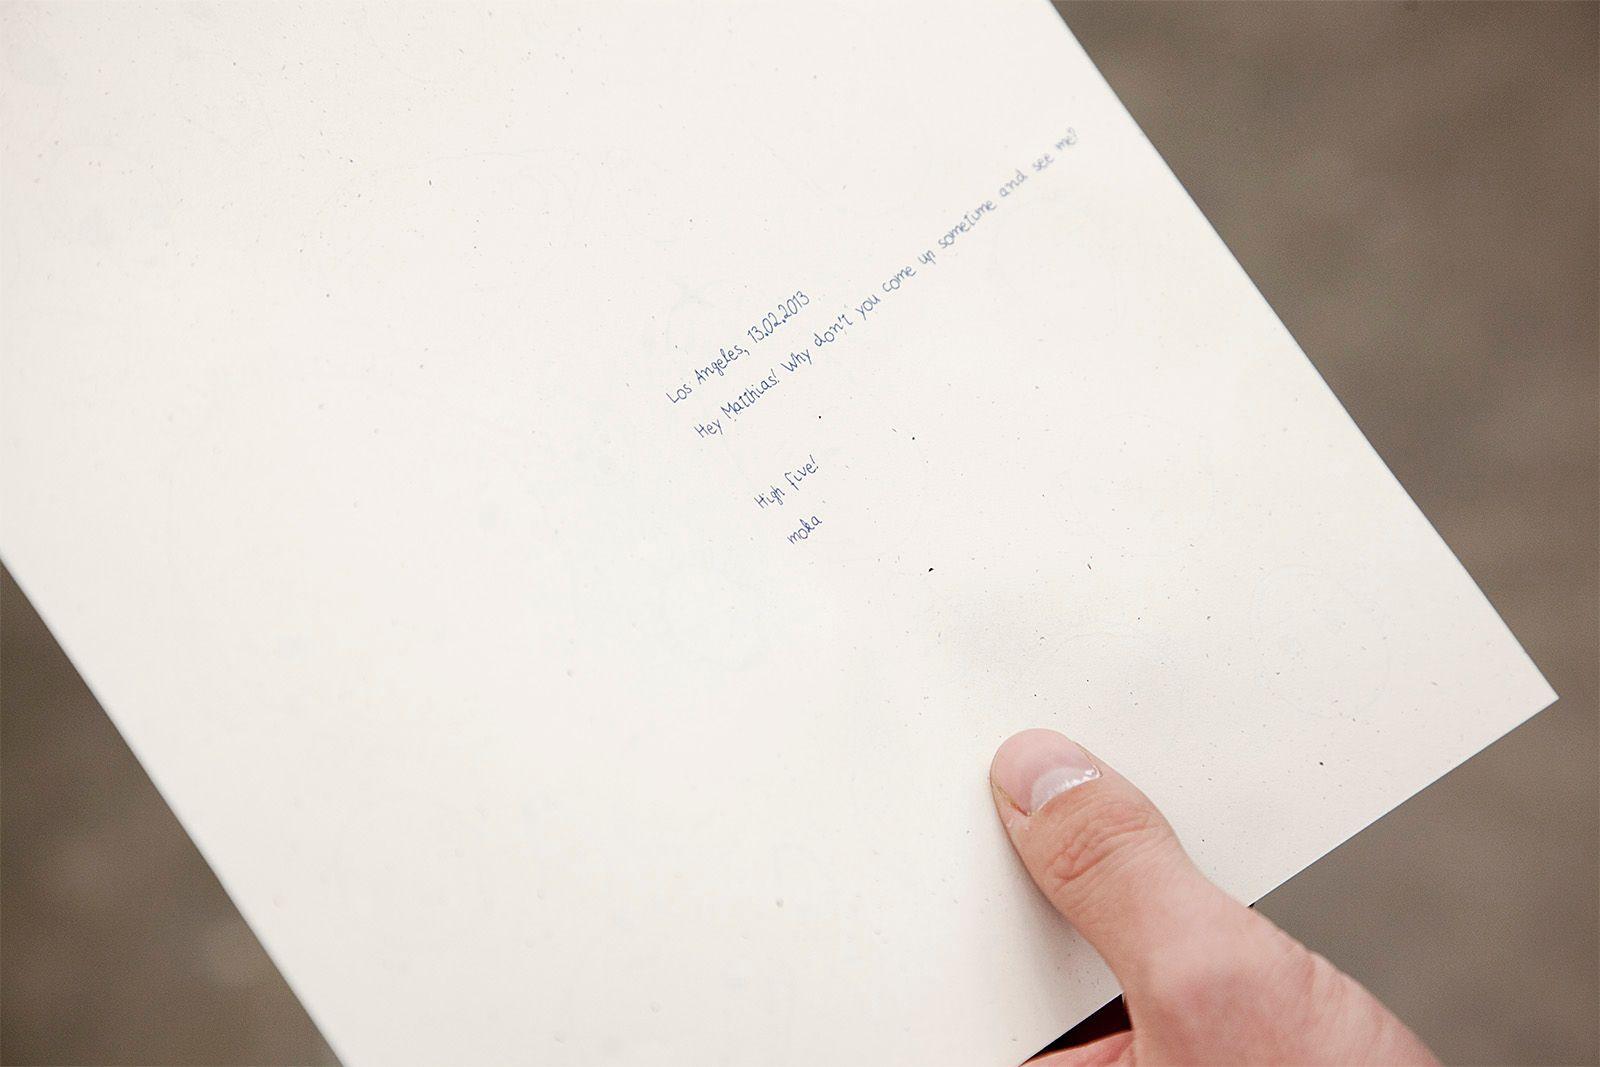 There is a paper held by a light skinned hand that has the text "Los Angeles, 13.02.2013". NEXT LINE: "Hey Matthias! Why don't you come up sometime and see me?" NEXT LINE: "High five!" NEXT LINE: "moka". The text is blue, small, and in a handwriting-like 